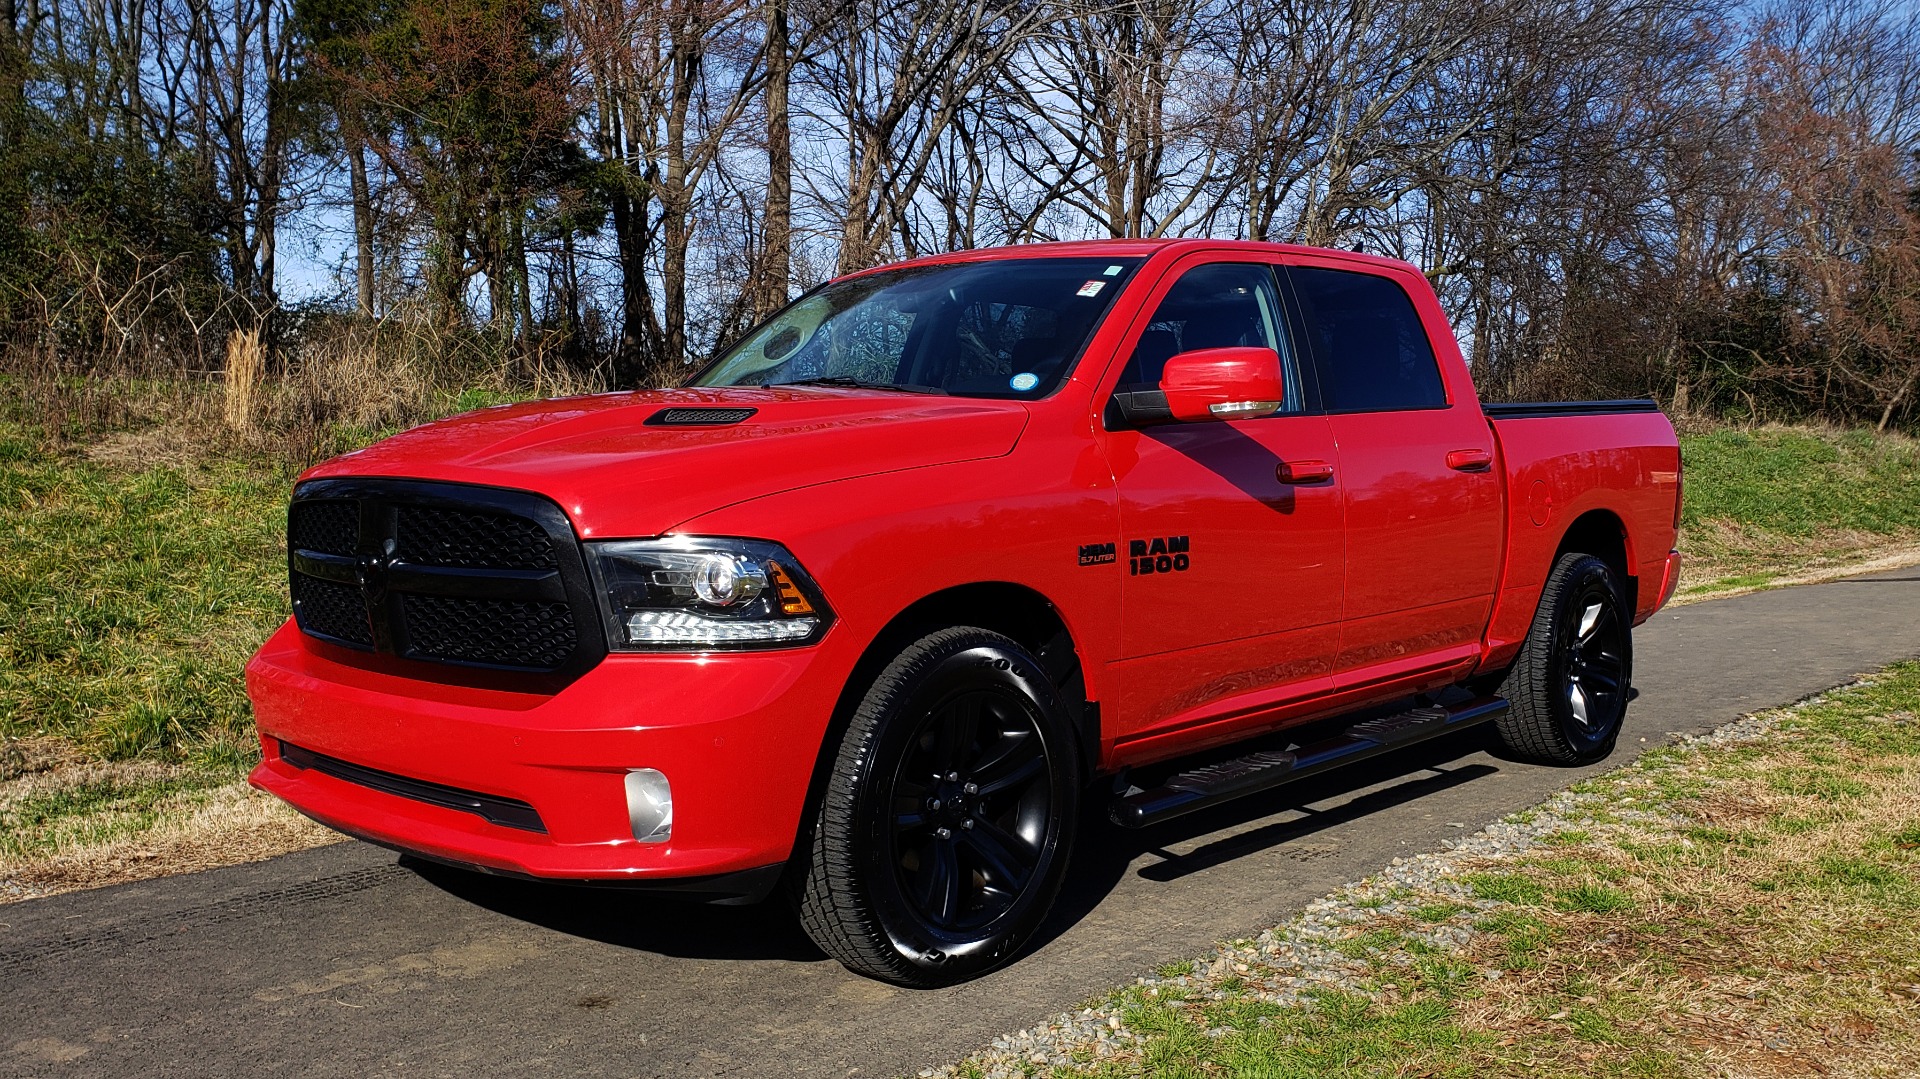 Used 2017 Ram 1500 NIGHT EDITION CREWCAB 4X4 / NAV / PARKSENSE for sale Sold at Formula Imports in Charlotte NC 28227 1